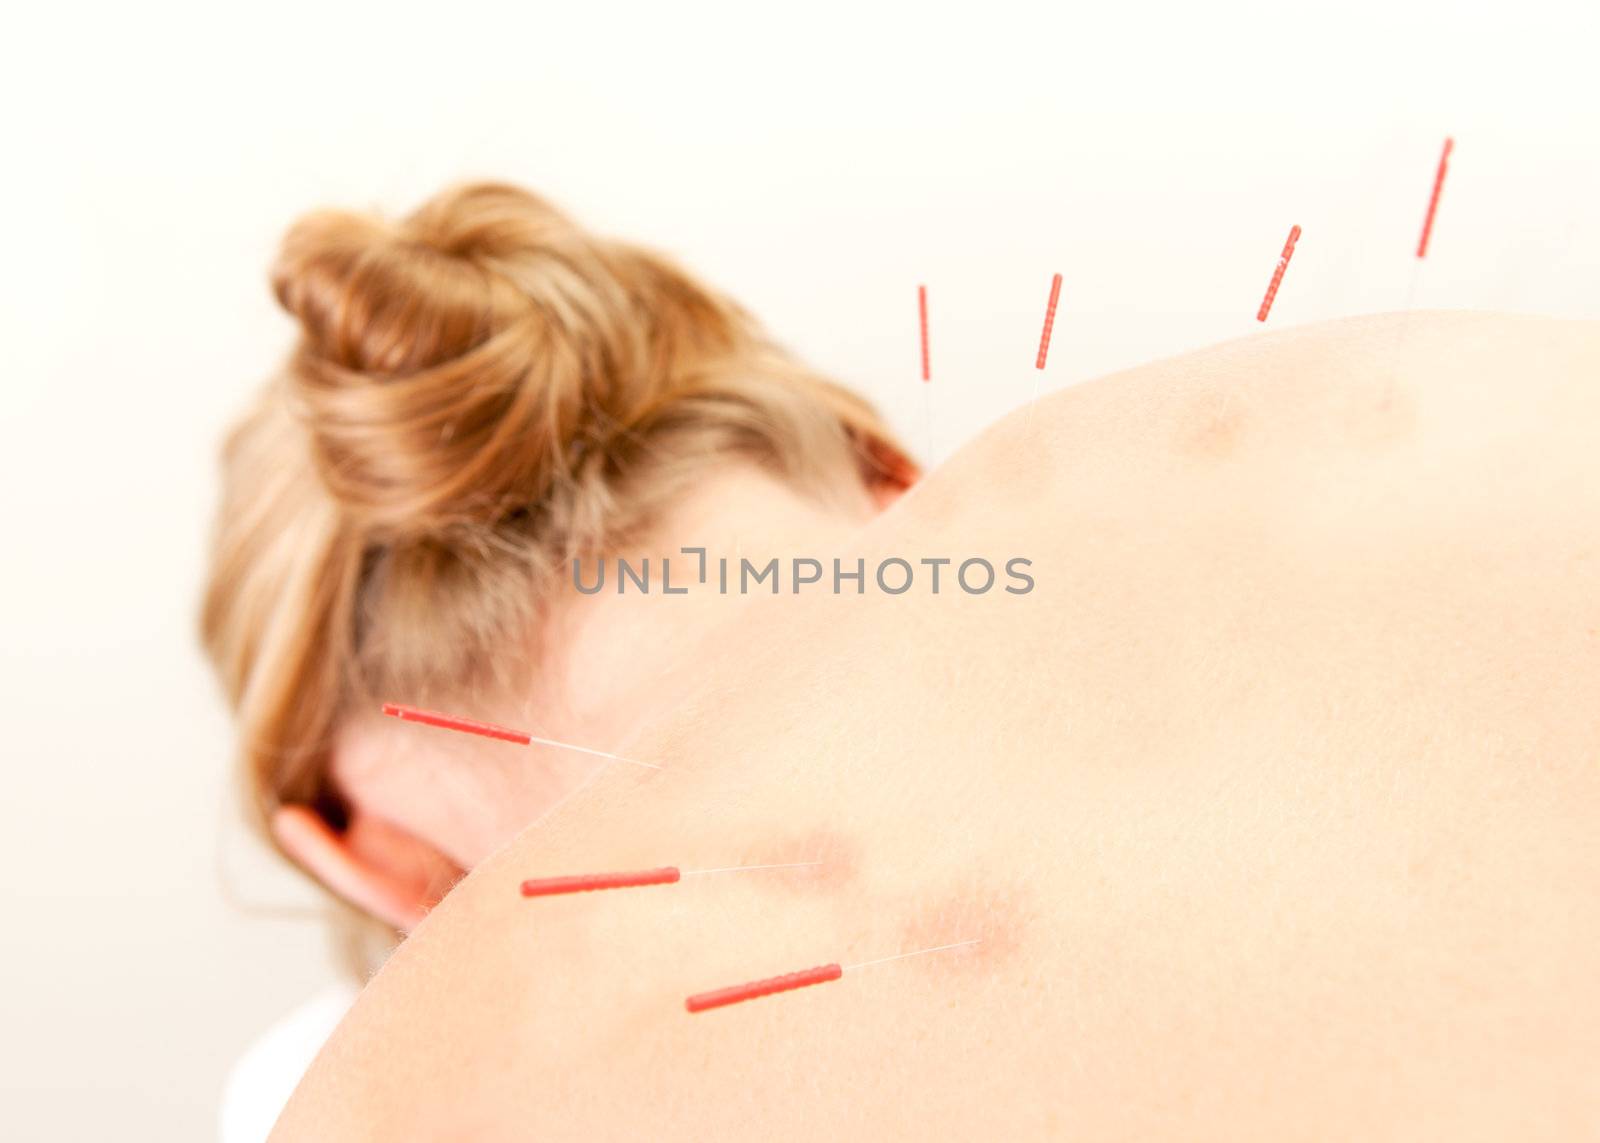 Female acupuncture patient showing good redness at the needle points, a sign of good response to the treatment